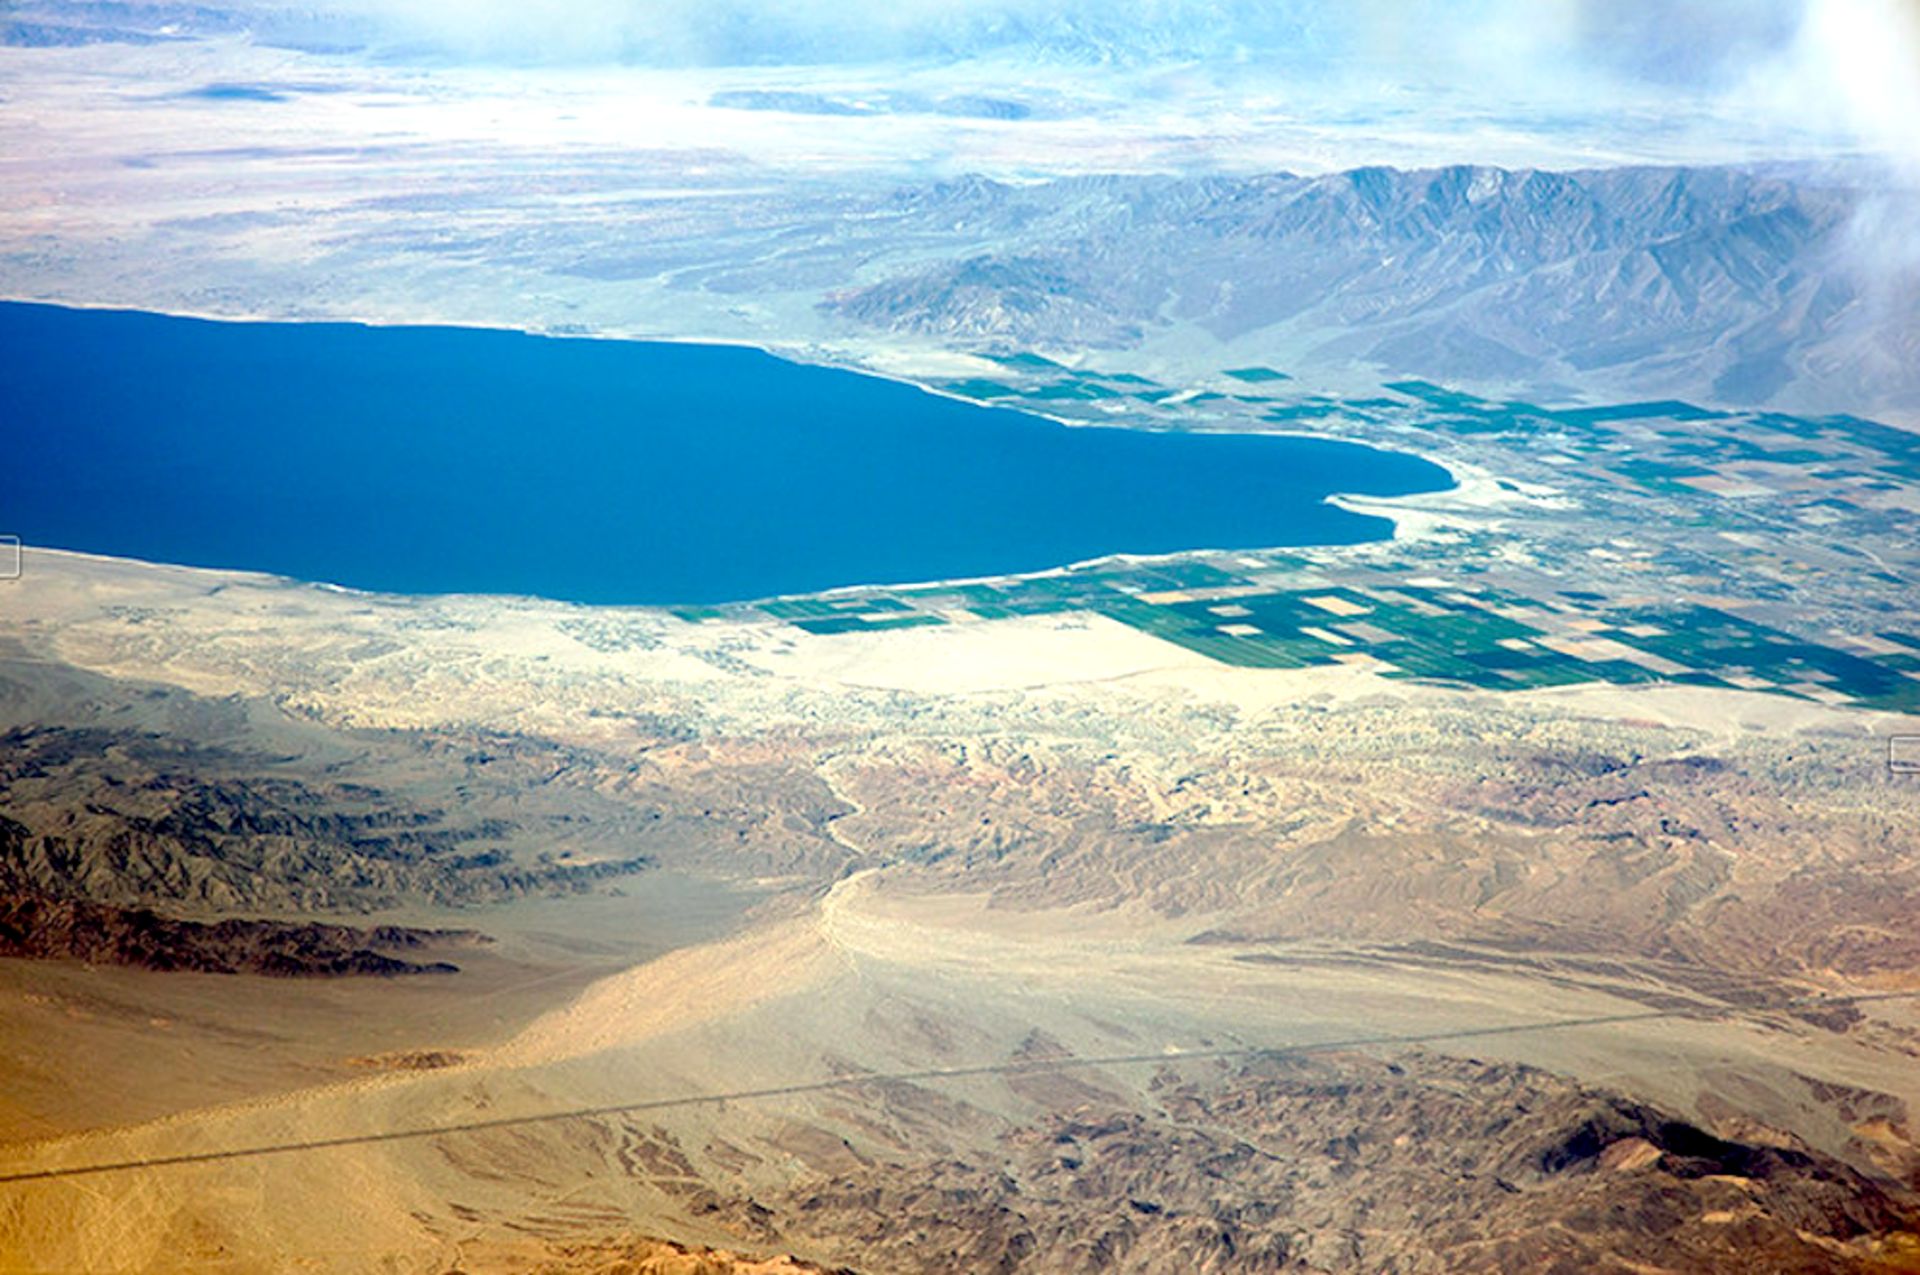 Experience thrilling adventures near the Salton Sea in Imperial County, CA! Welcome to excitement! - Image 10 of 14